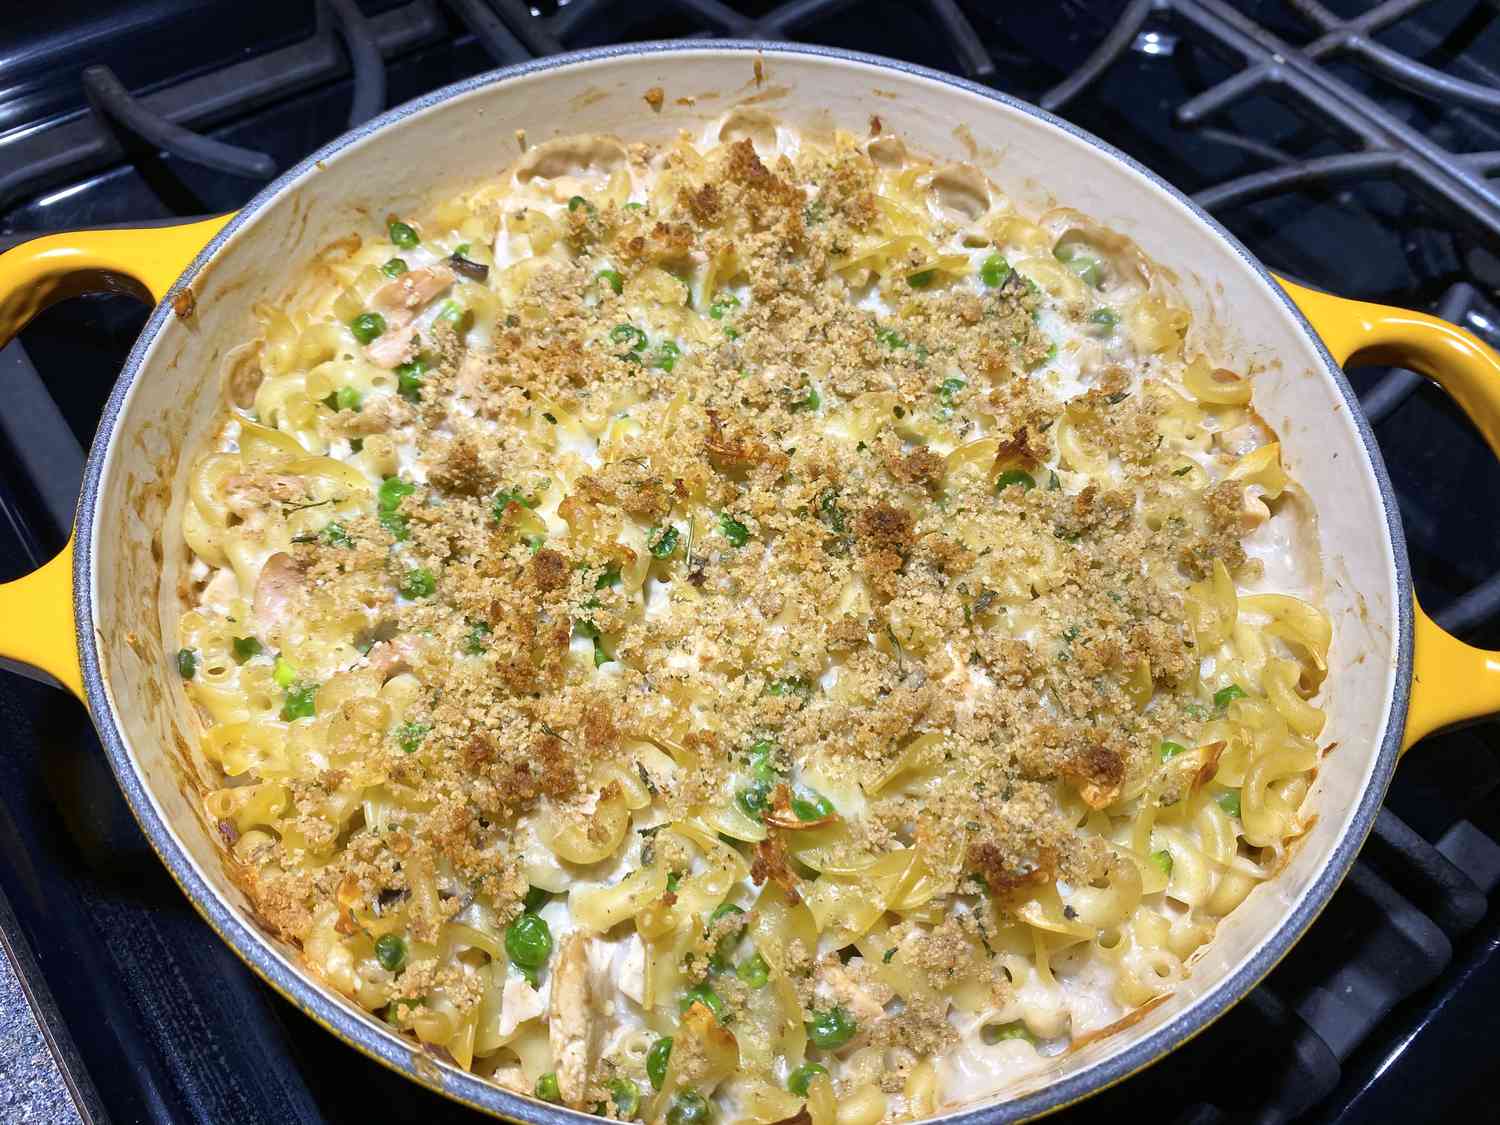 Close up view of Campbell's Tuna Noodle Casserole with peas in a yellow pan on the stove